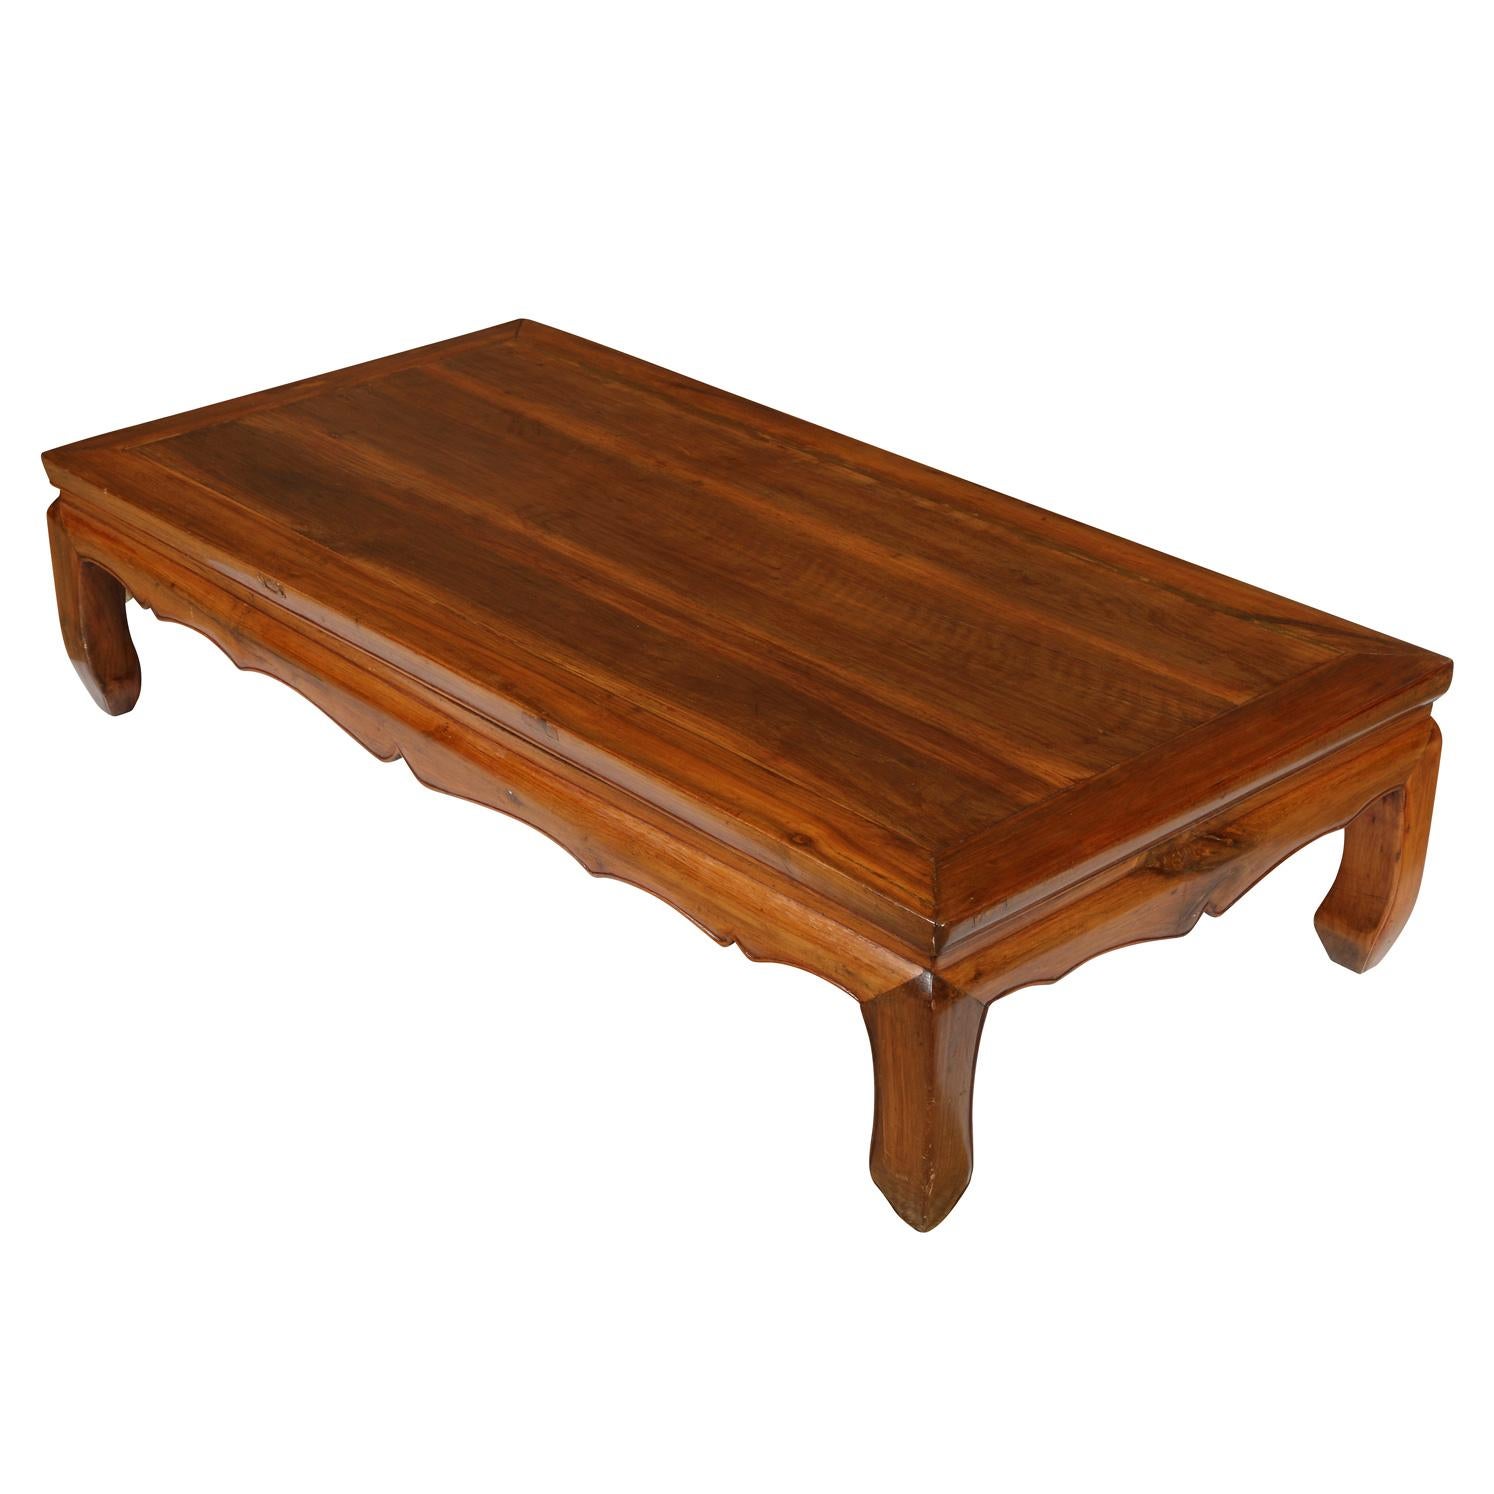 Vintage Asian elmwood coffee table with scalloped apron.